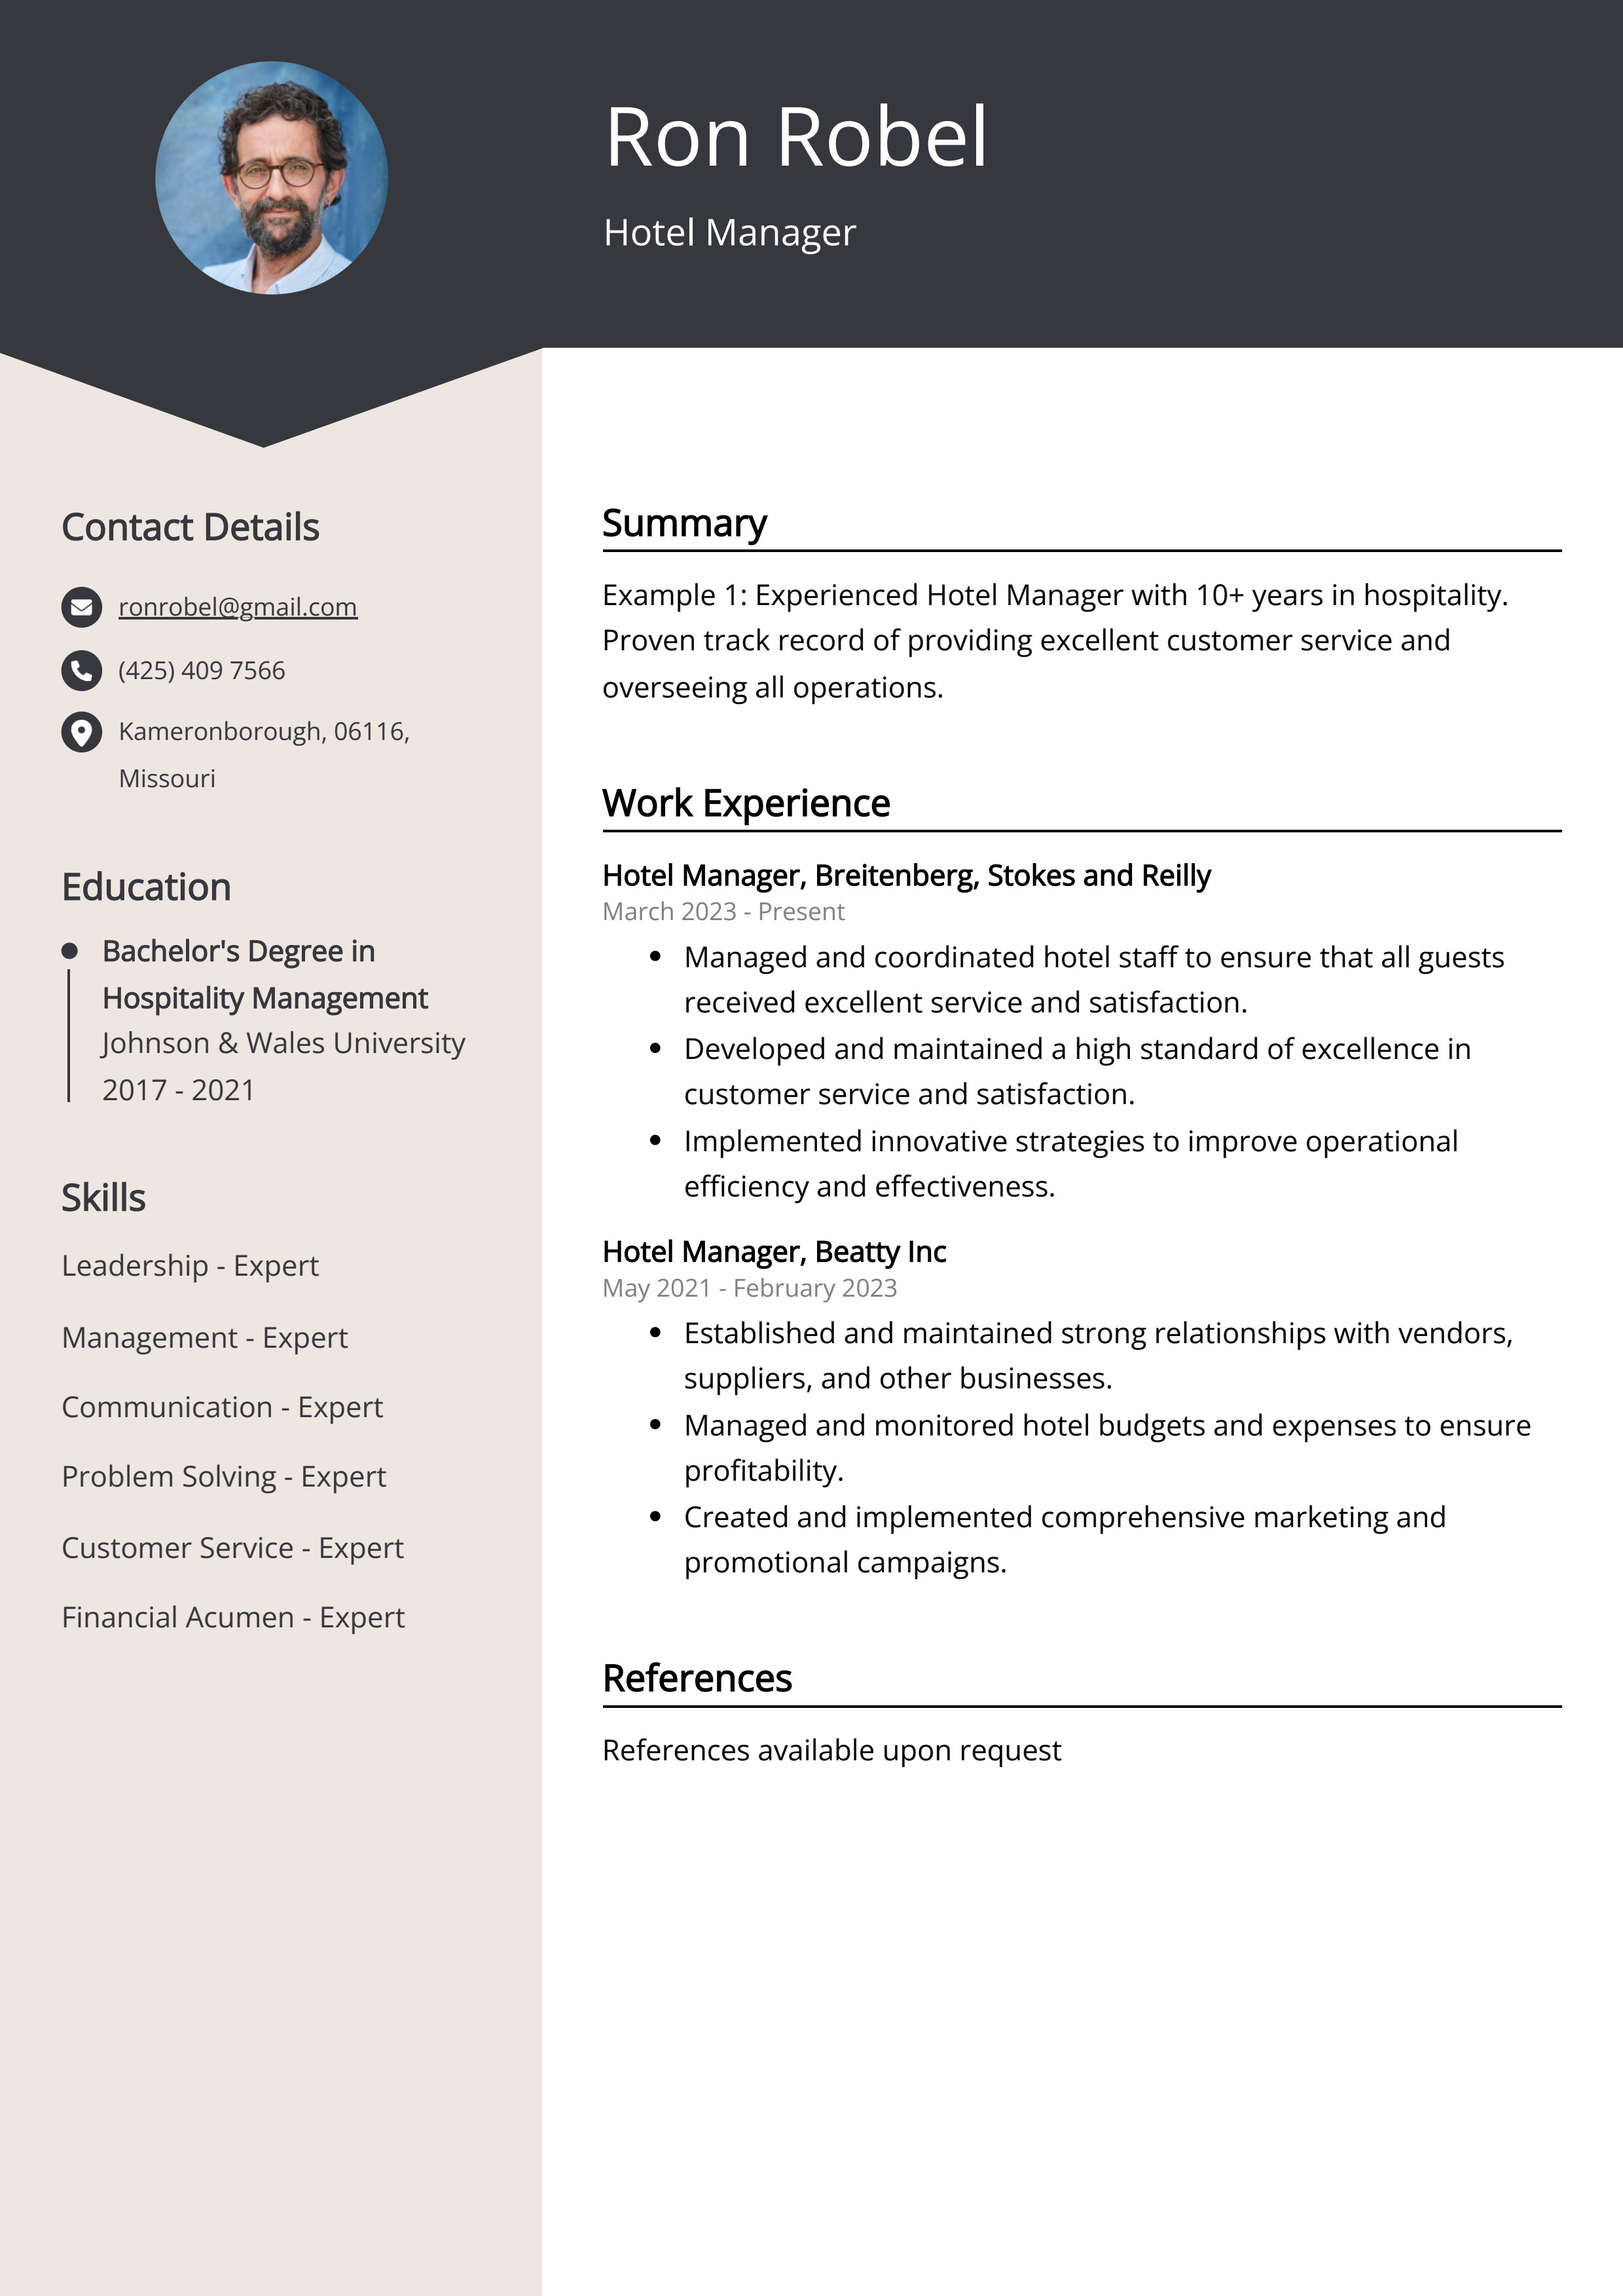 Hotel Manager CV Example